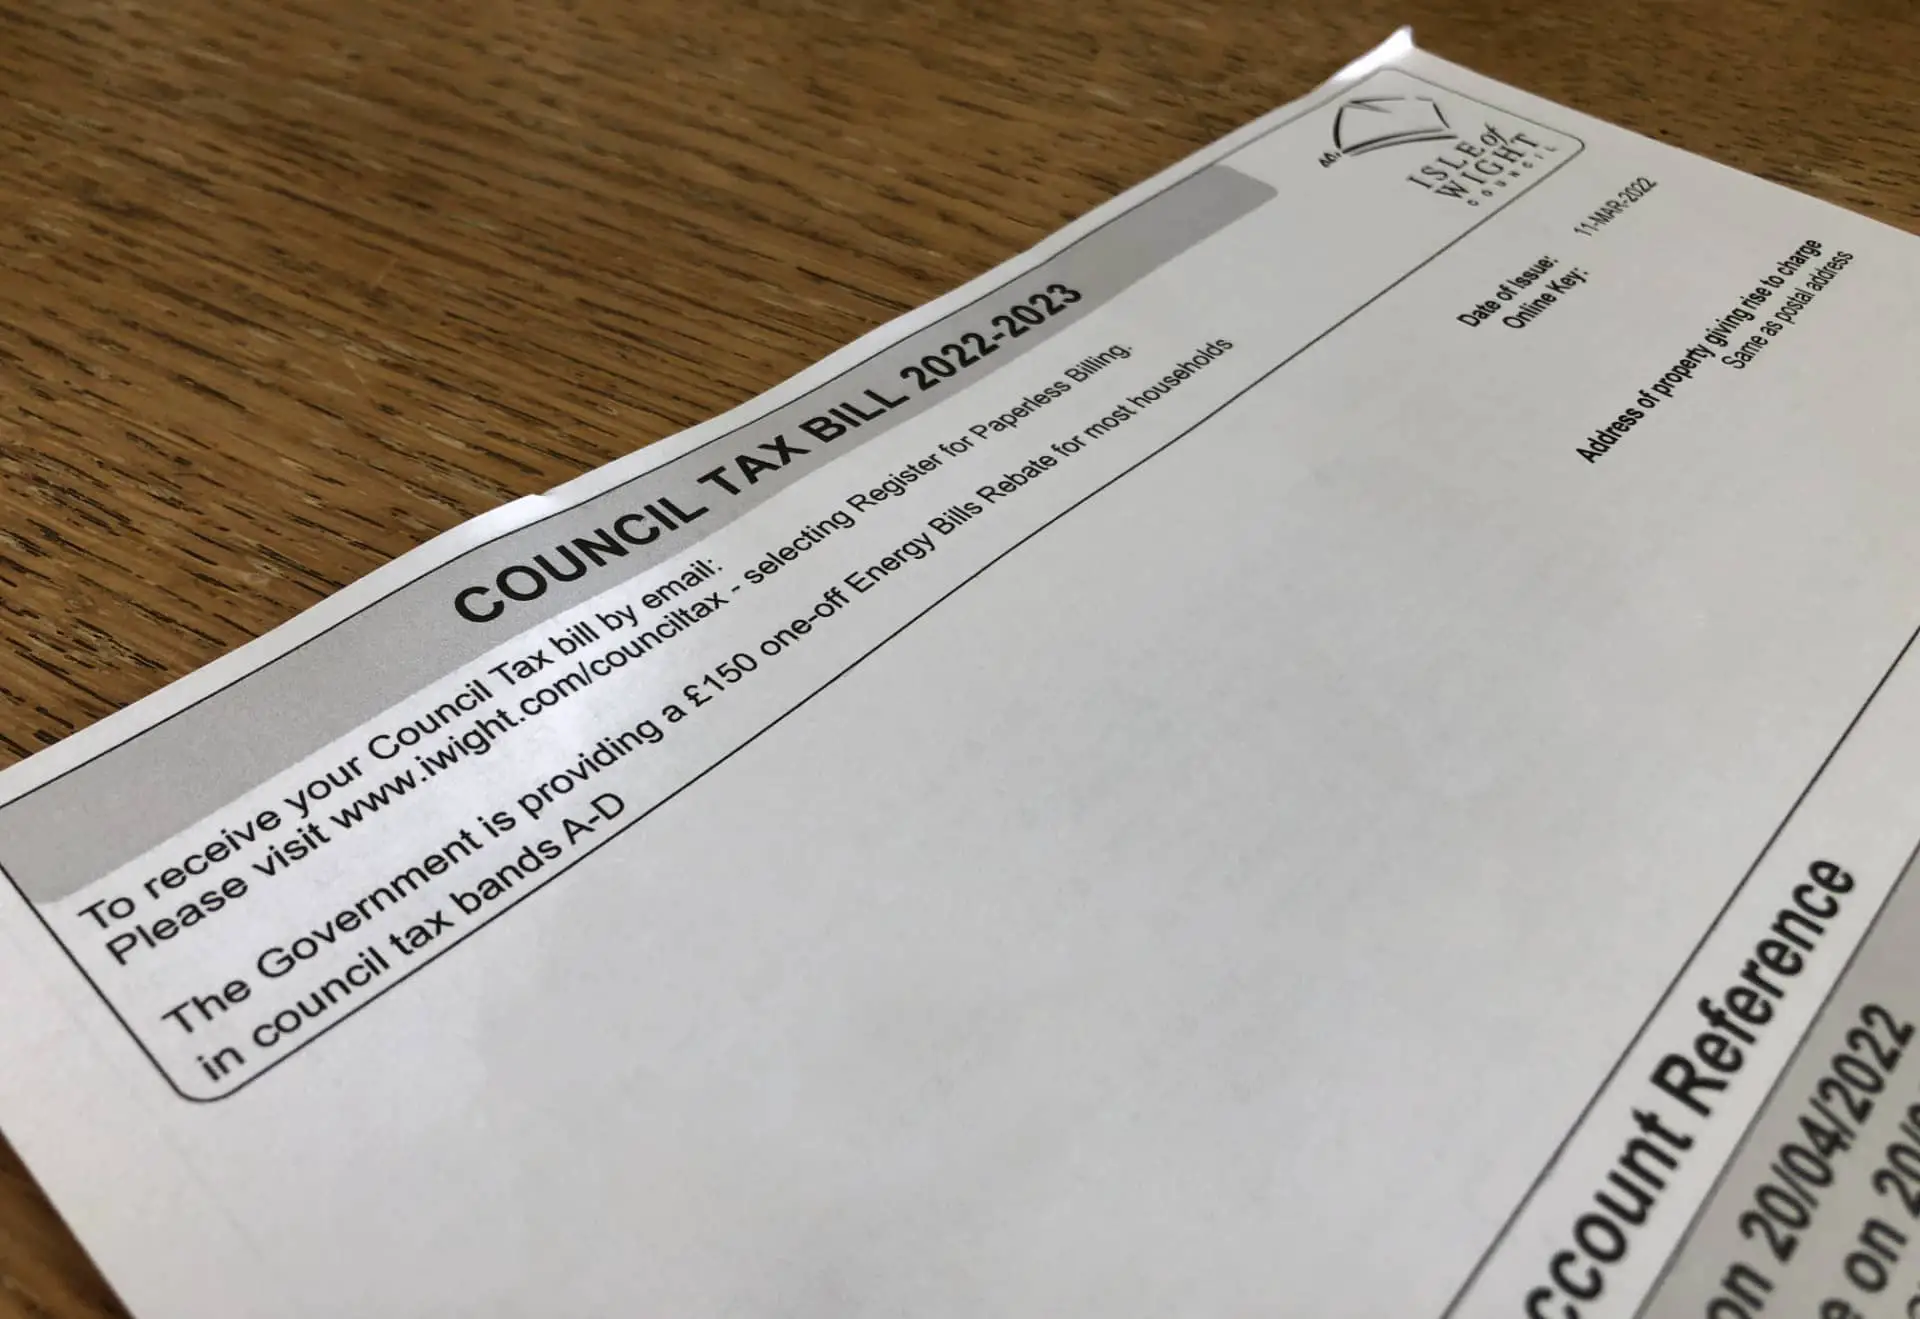 How To Claim For Council Tax Rebate